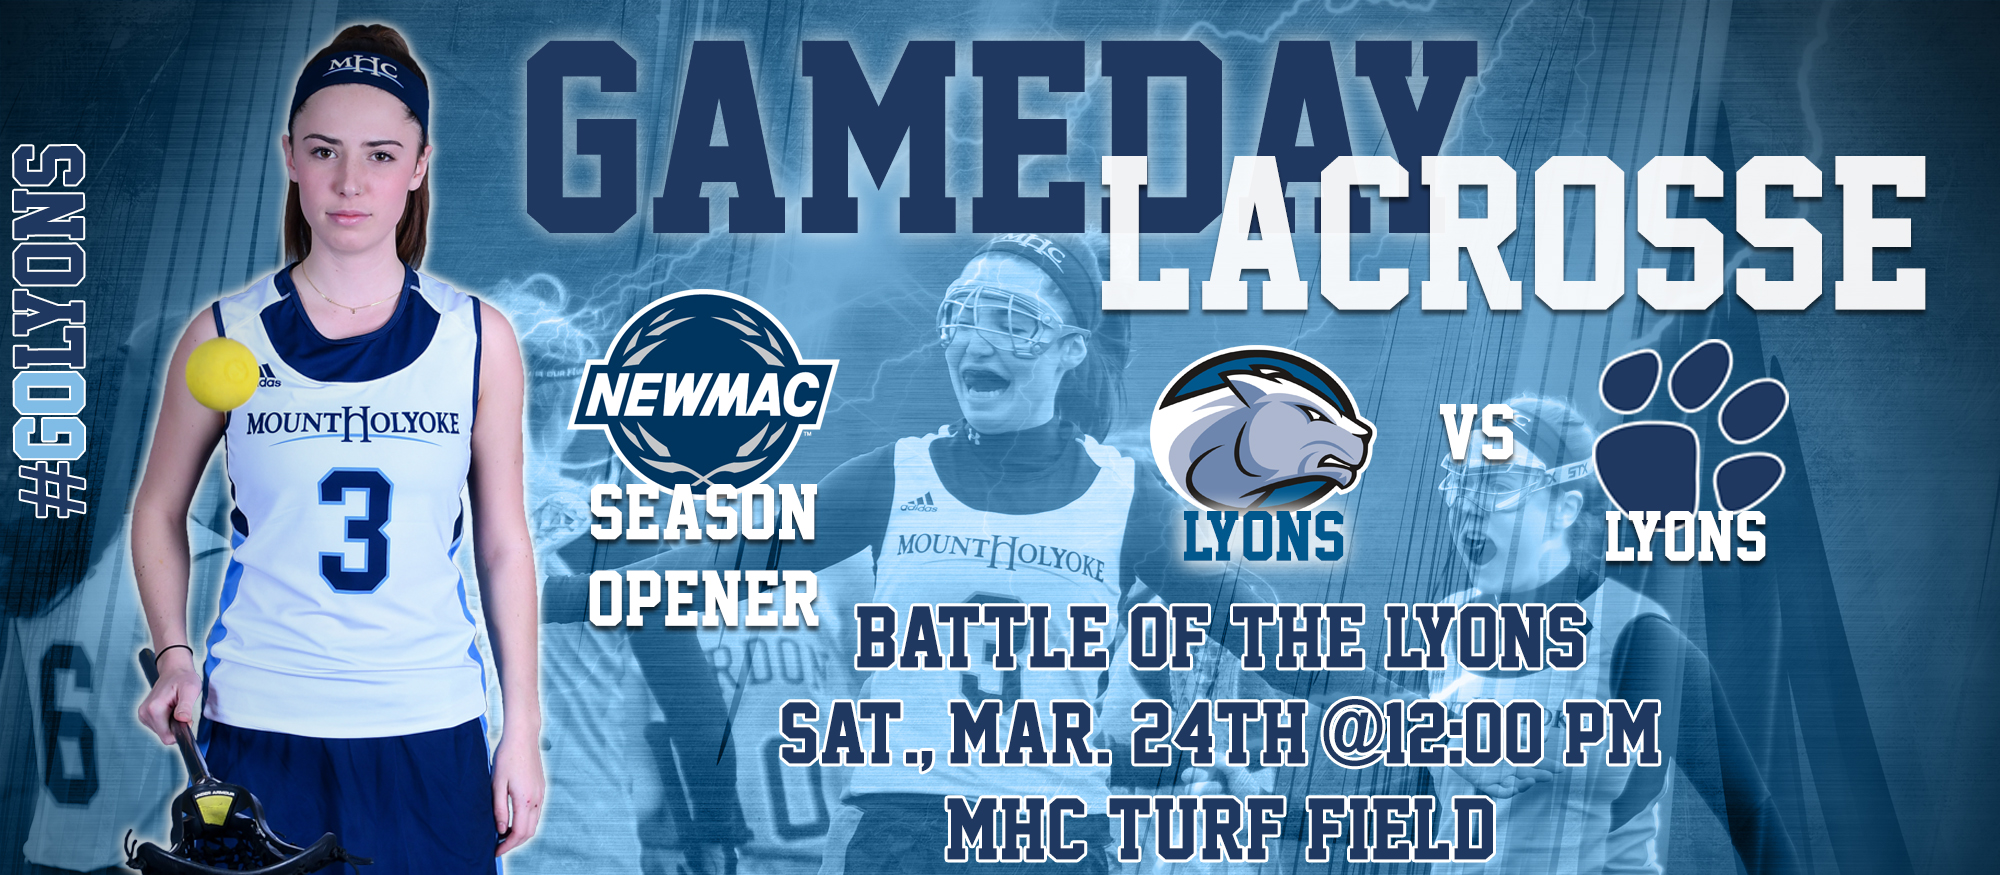 Gameday graphic featuring Lyons lacrosse captain Mazzie Meotti to promote the March 24th home contest against Wheaton at 12pm.